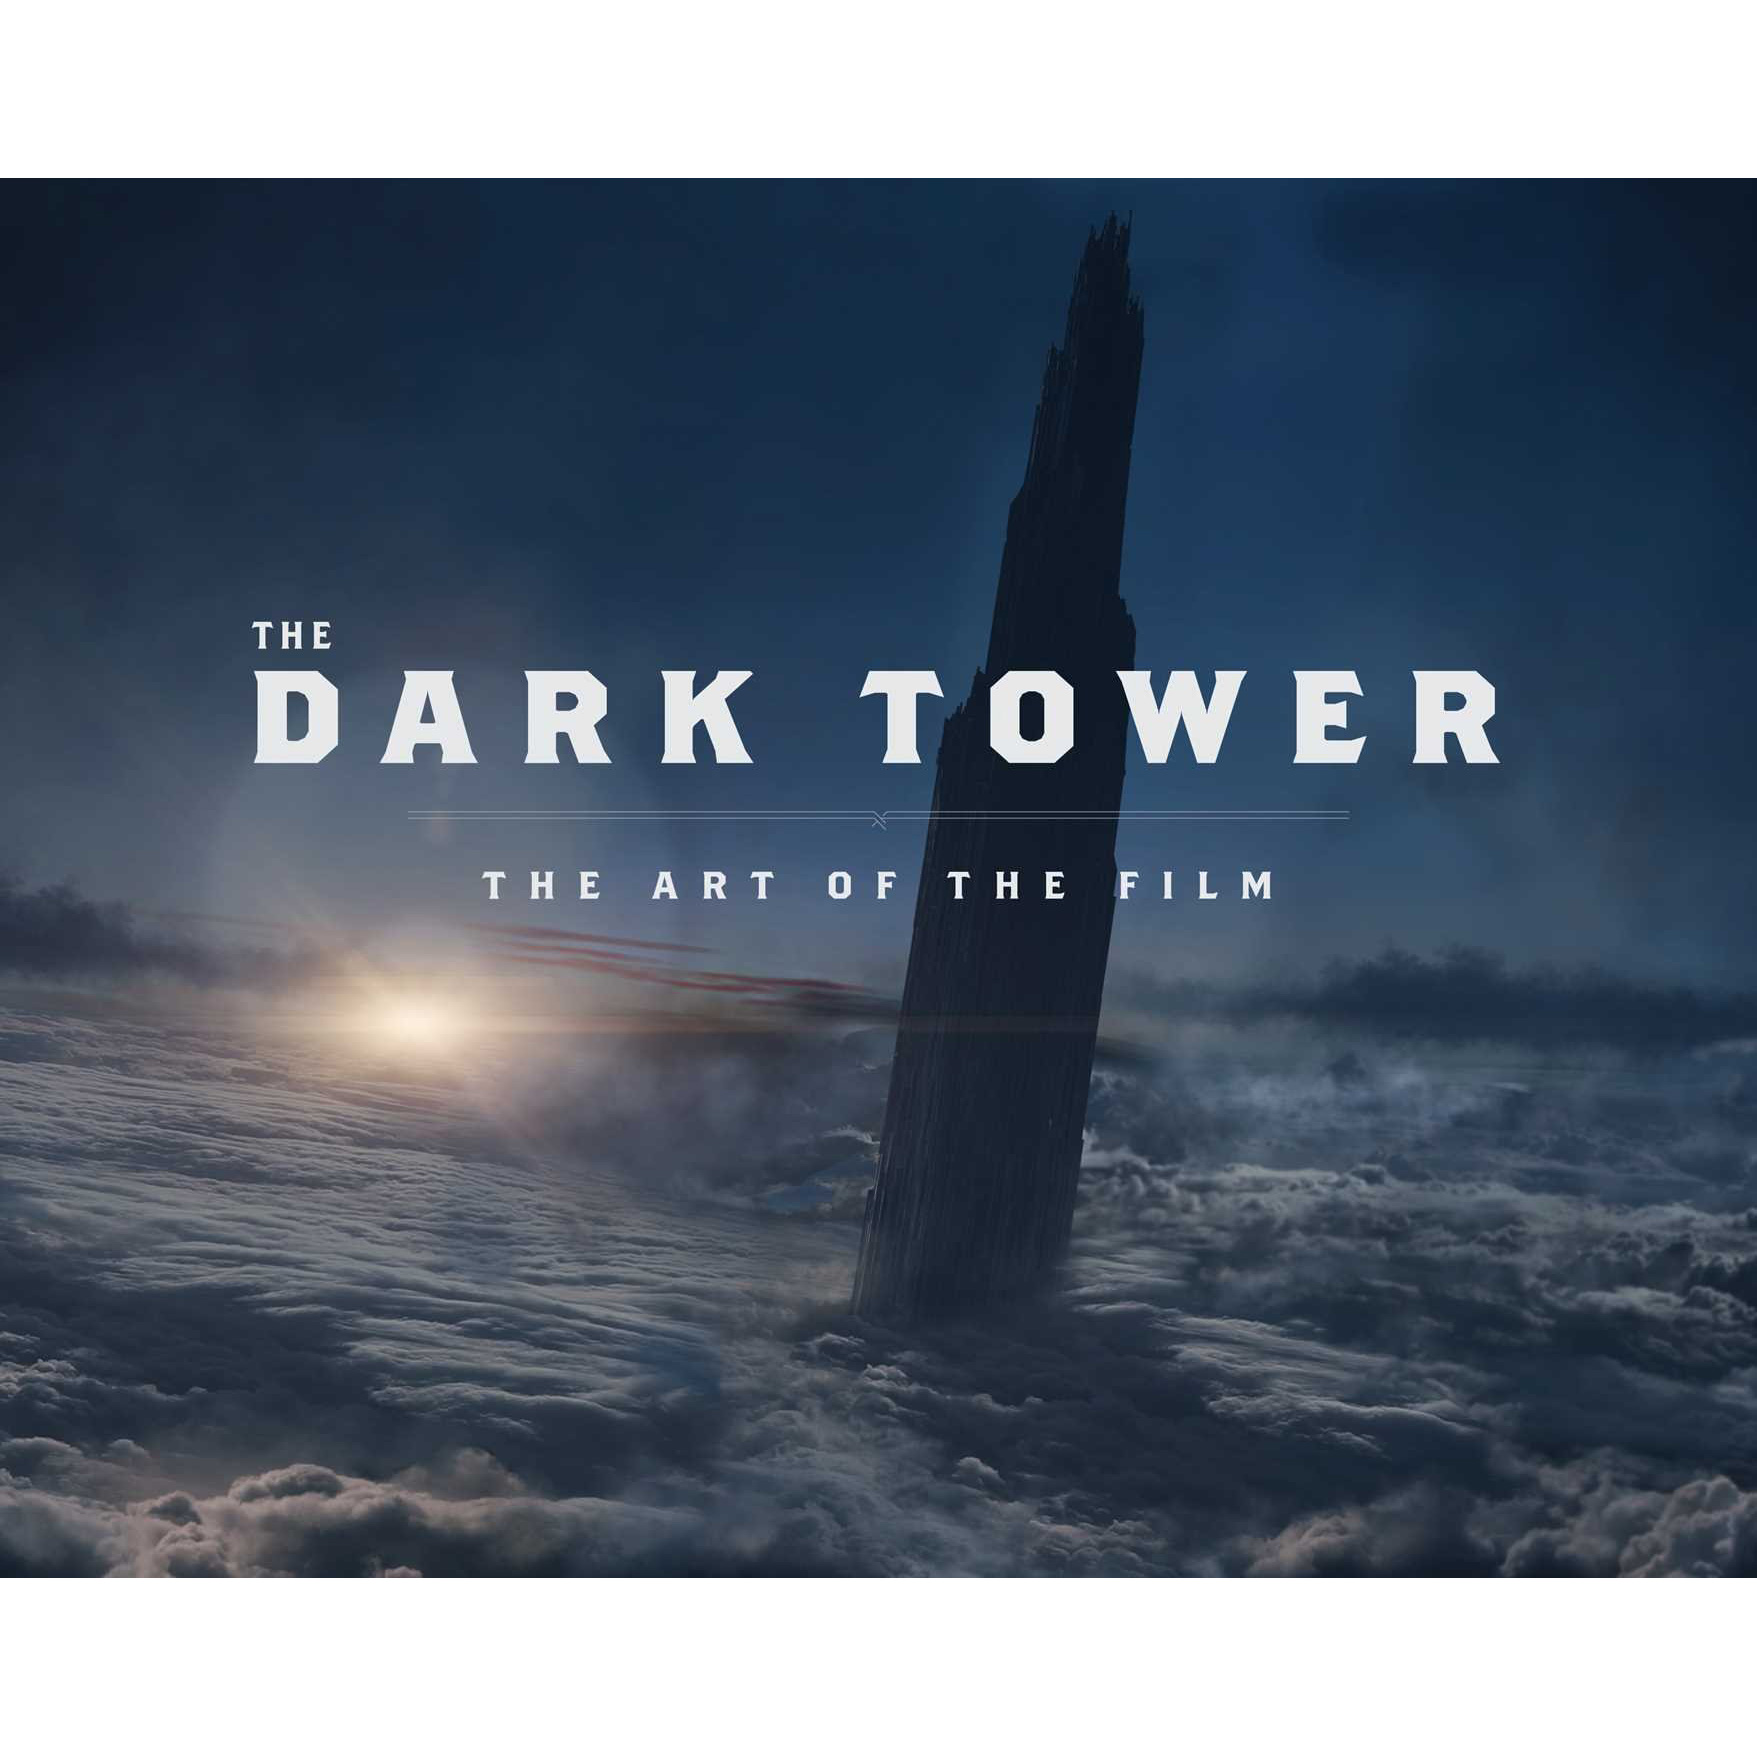 The Dark Tower: The Art of the Film by Daniel Wallace